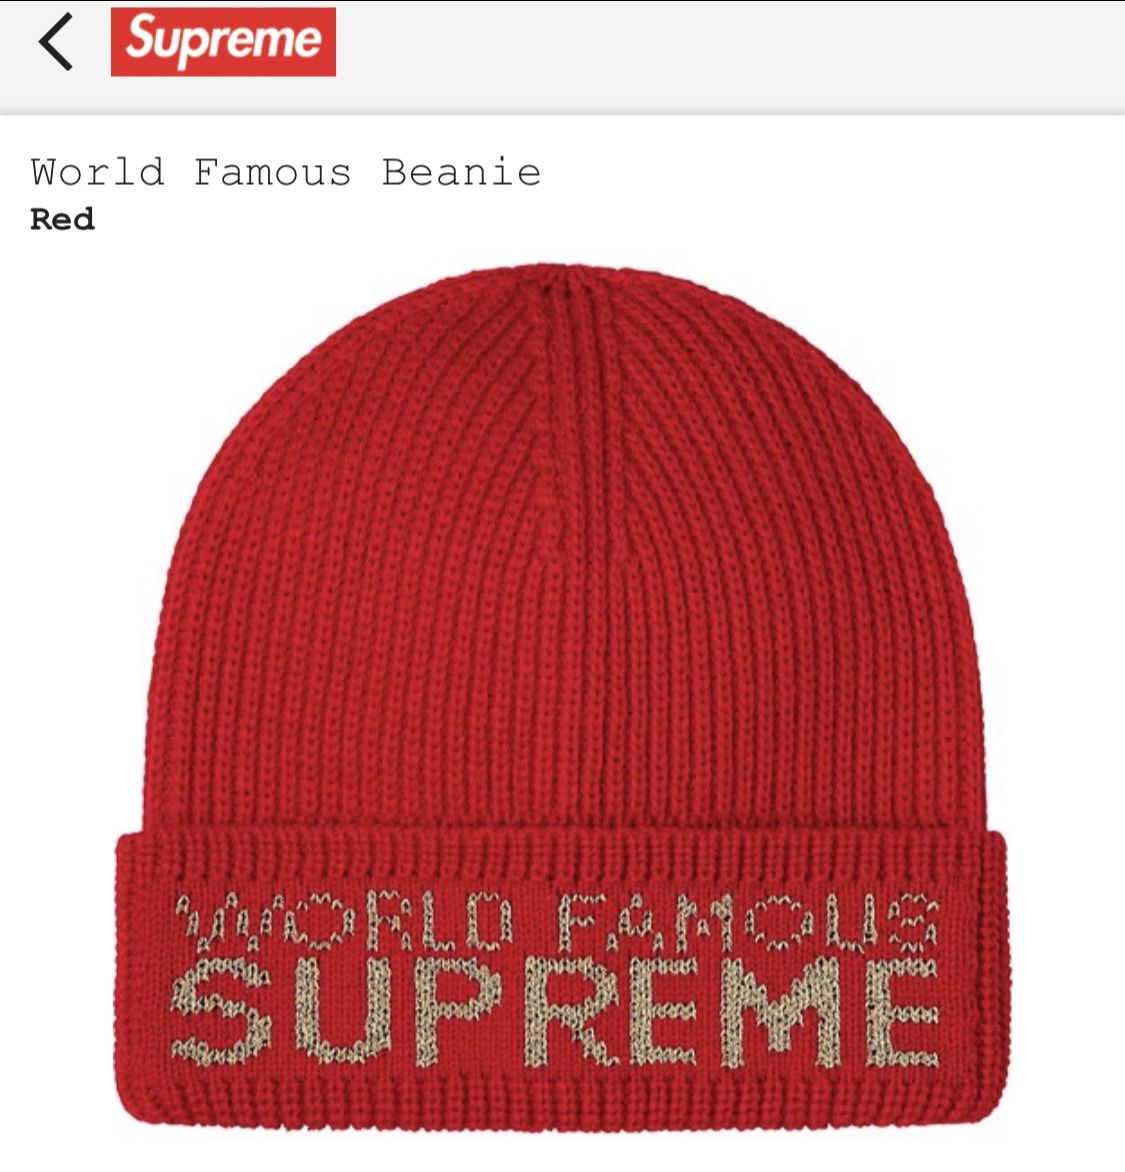 Supreme Worlds Famous Beanie